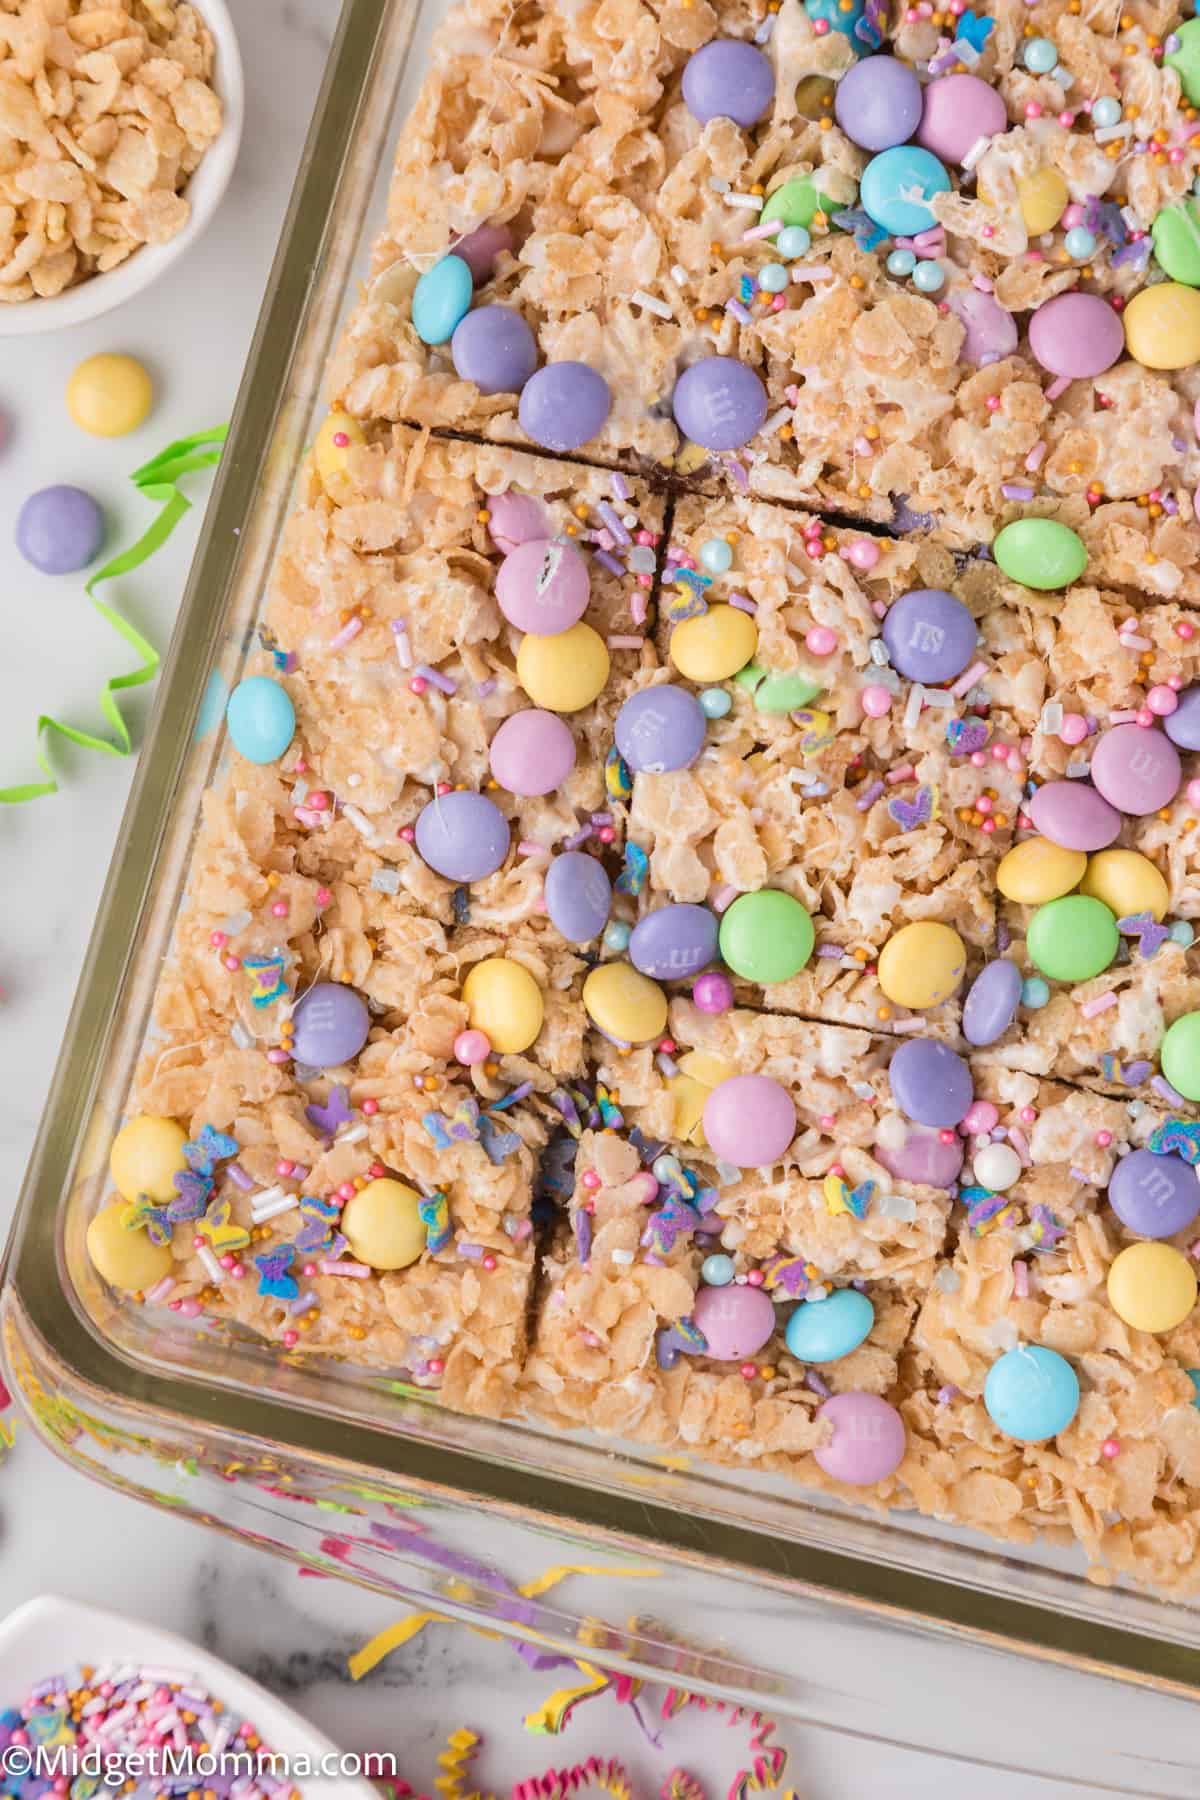 A festive tray of rice cereal treats sprinkled with colorful candy and edible glitter, ideal for a celebration.